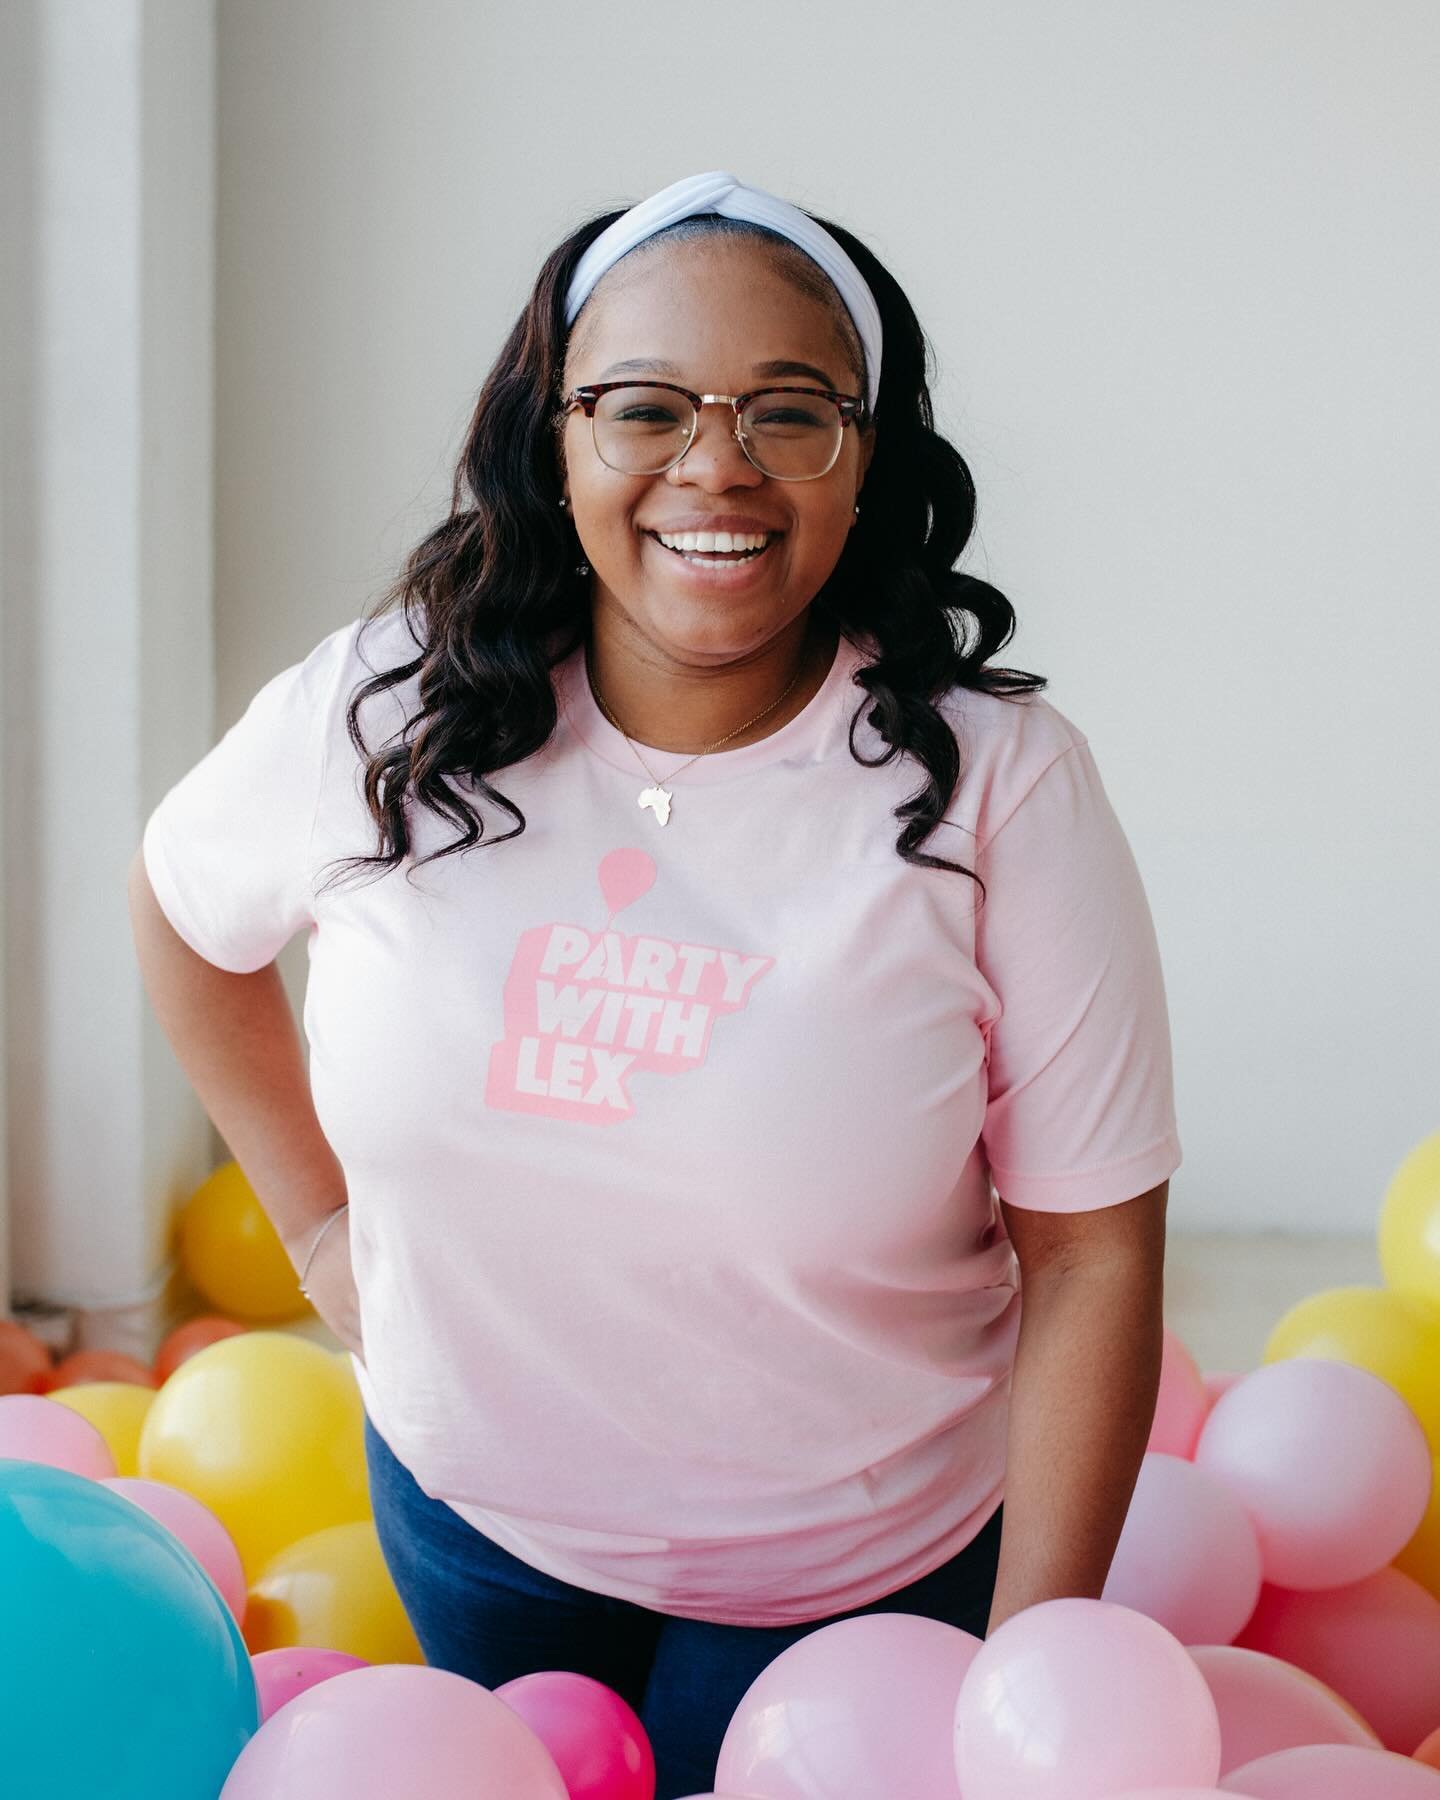 Happy Birthday to our Shanekqua! 💖 Glad to be working by your side 🙏🏽🥳 You are very much appreciated!
・・・
Photography @unrulyblooms.co 
&bull;
&bull;
&bull;
&bull;
&bull;
#PARTYCREW #stlballoons #stlkidsparties #stlpartyplanner #stleventstylist #